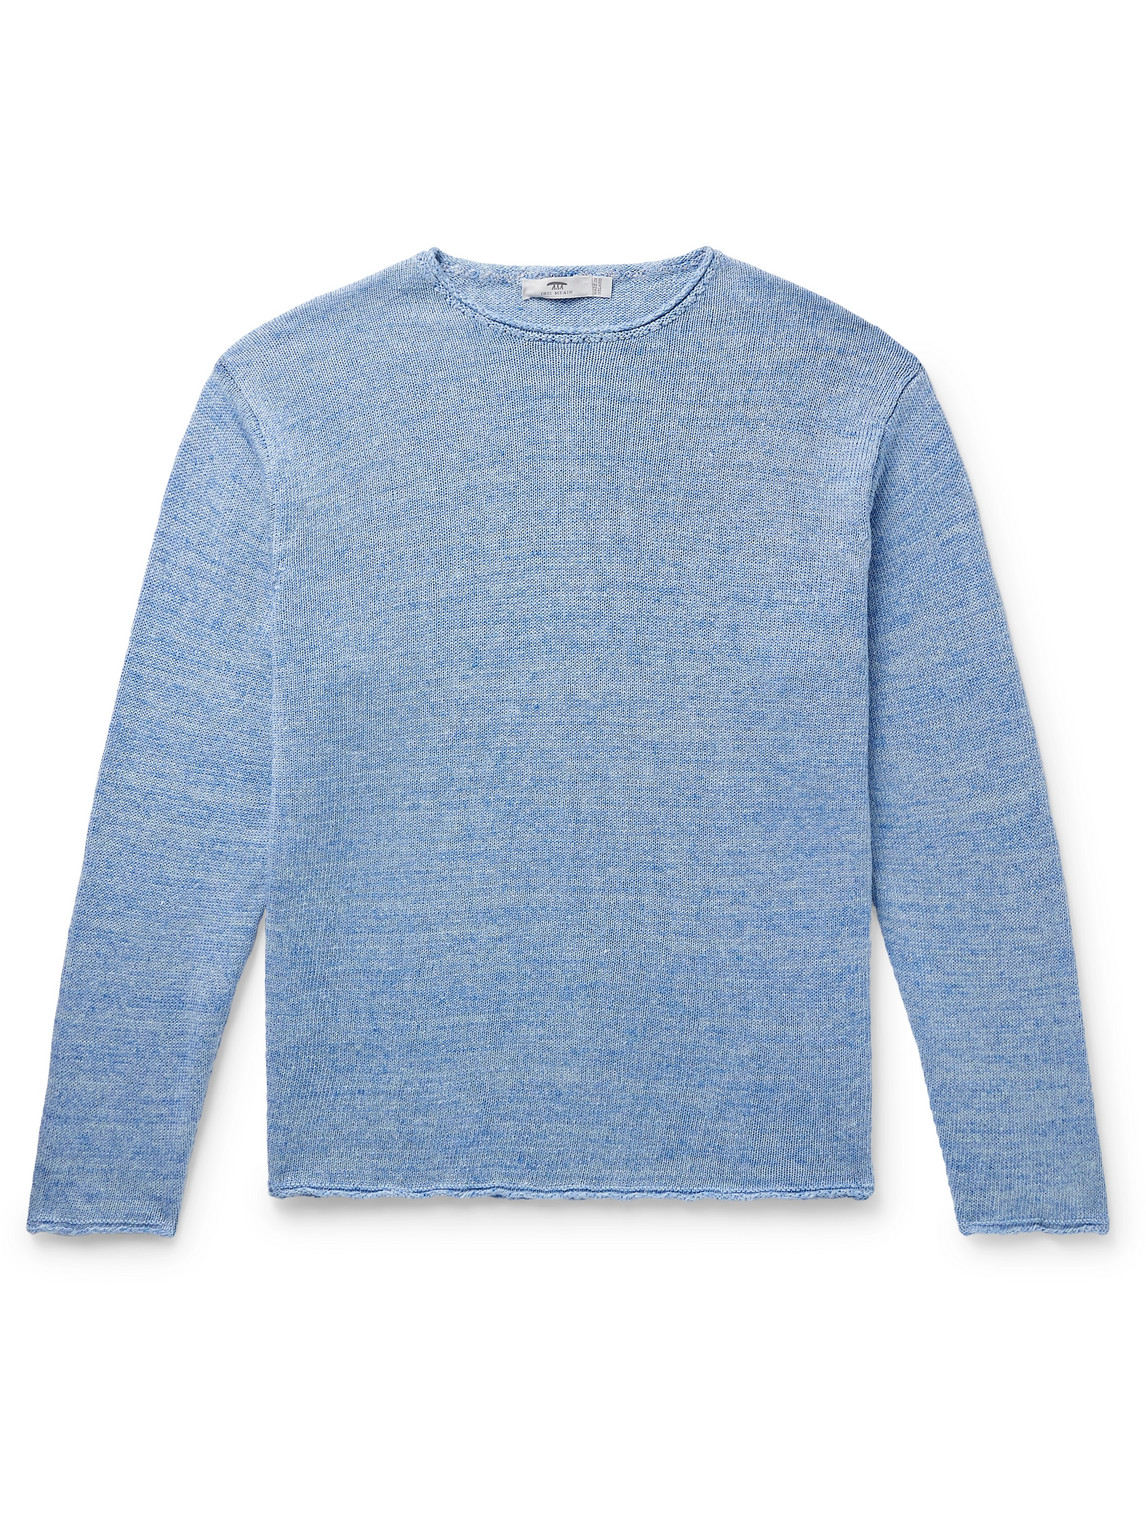 Inis Meain Linen Sweater In Blue